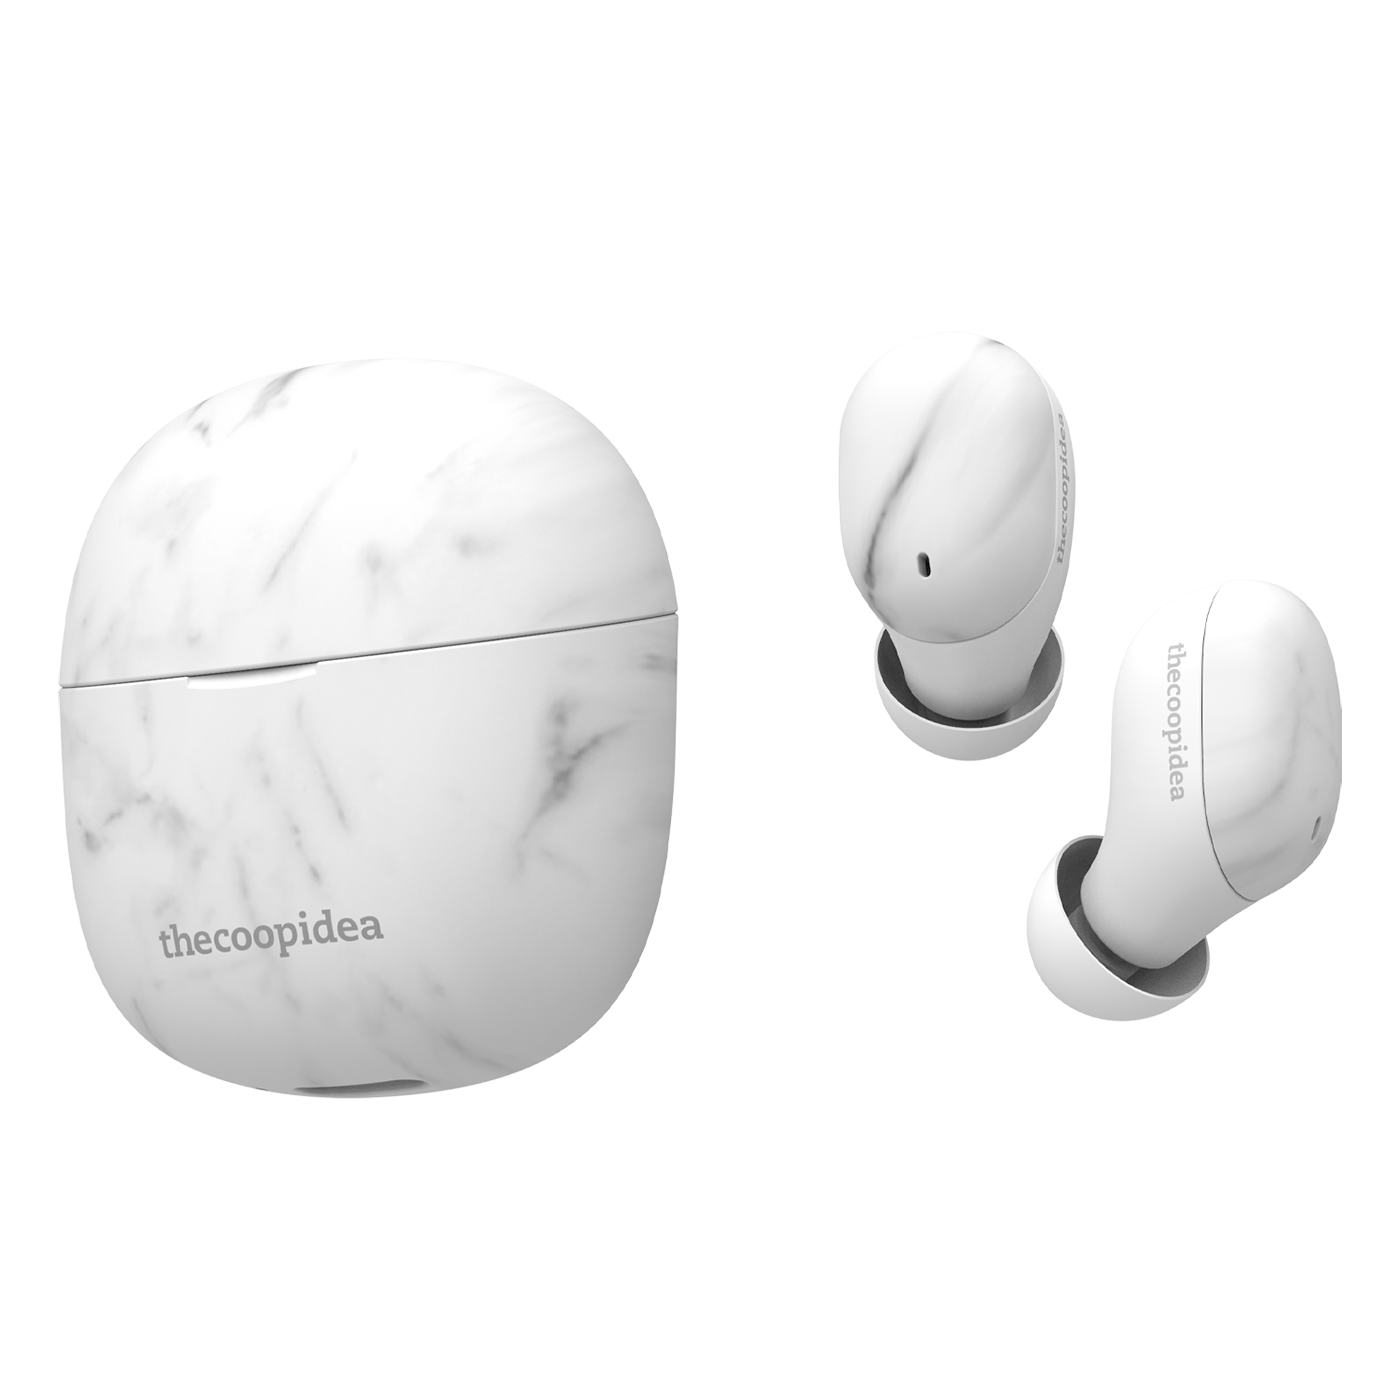 thecoopidea BEANS AIR True Wireless Earbuds - WhiteMarble